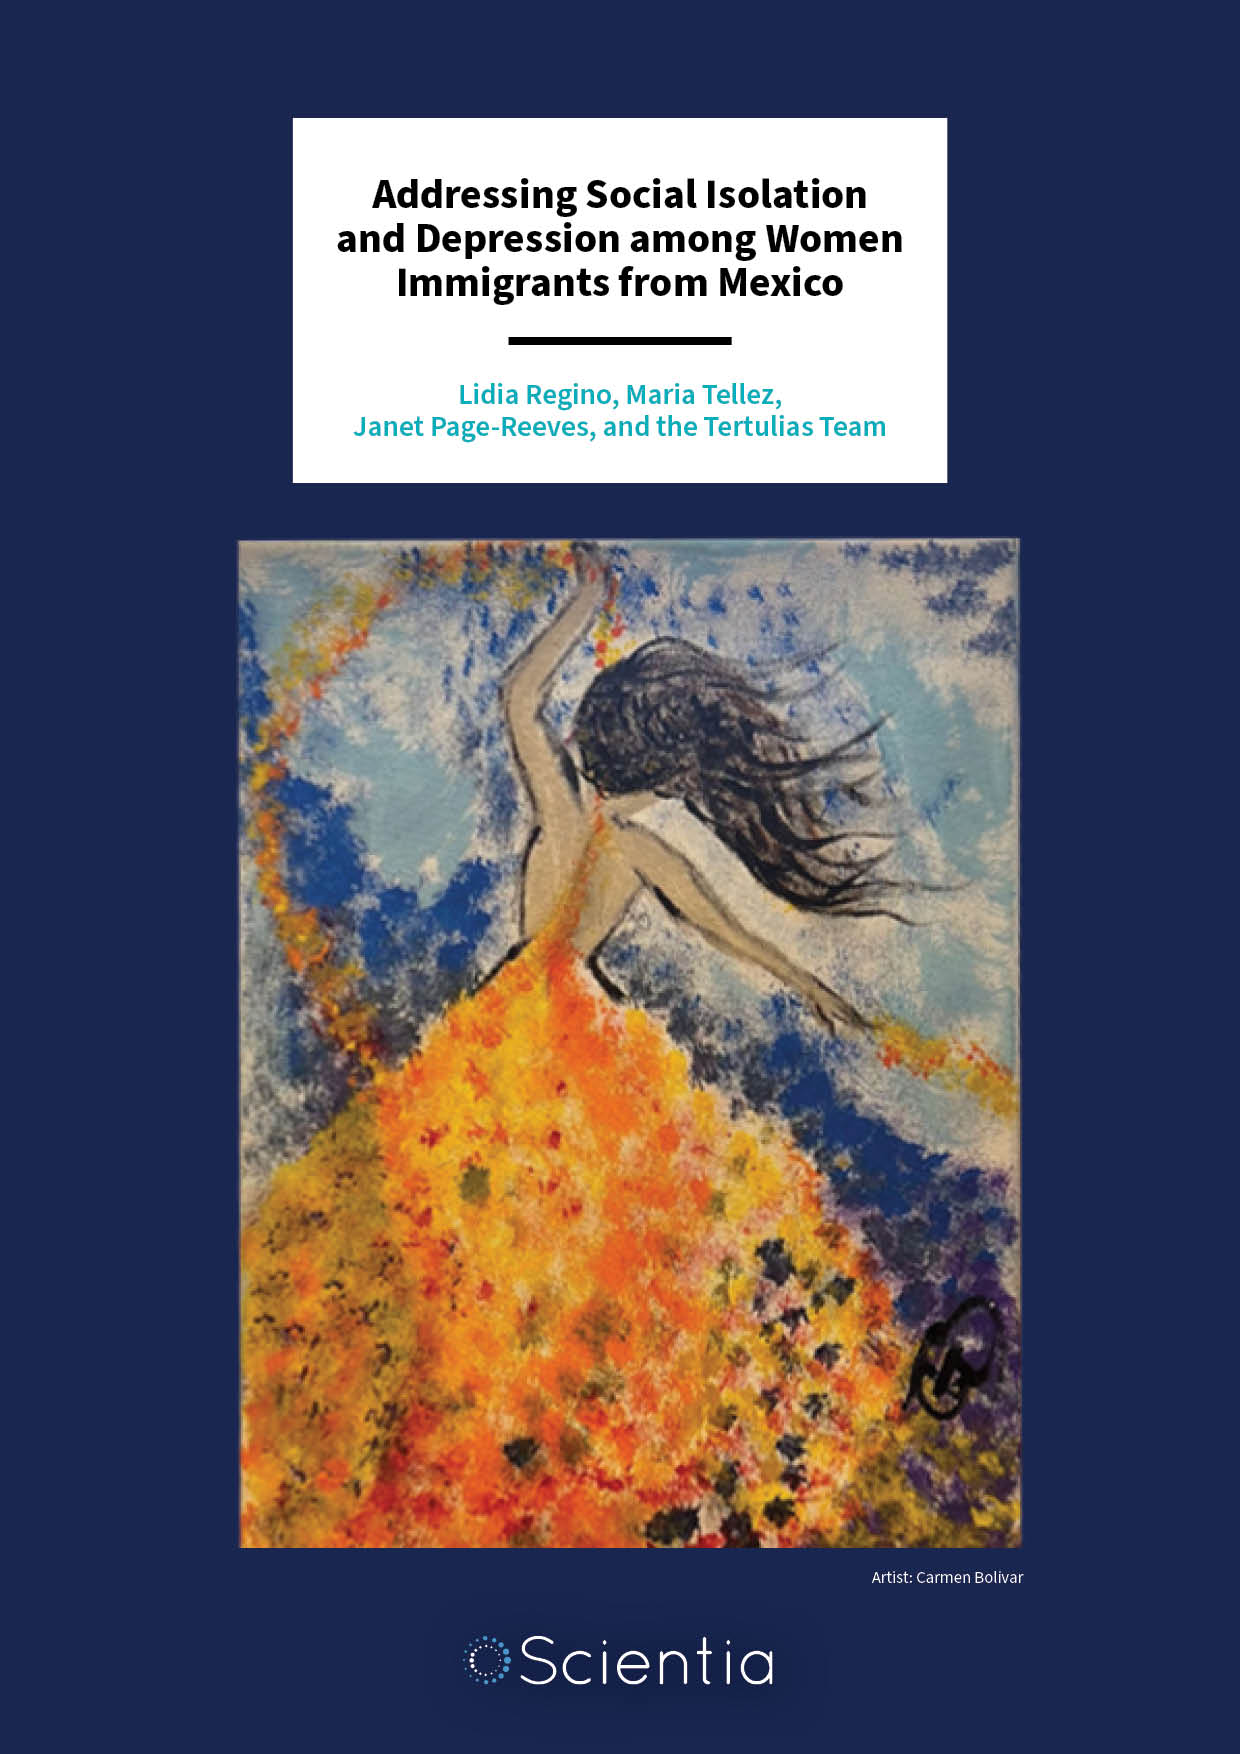 Addressing Social Isolation and Depression among Women Immigrants from Mexico